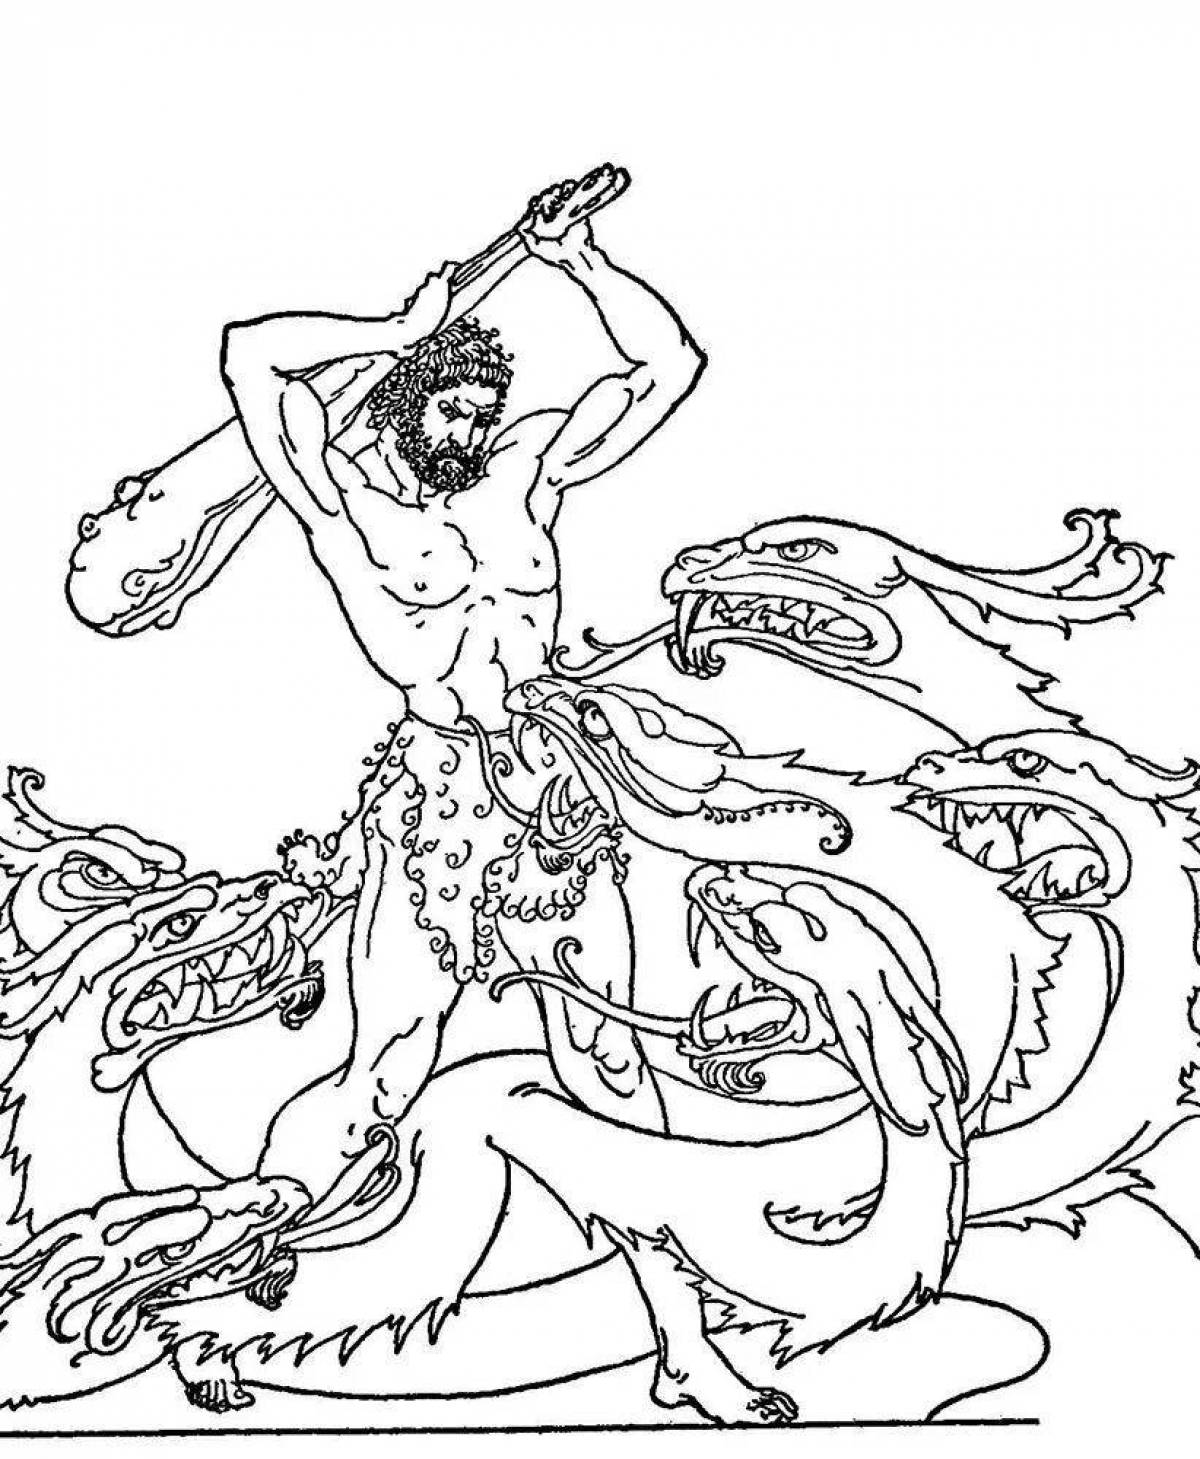 Coloring page dazzling 12 labors of hercules